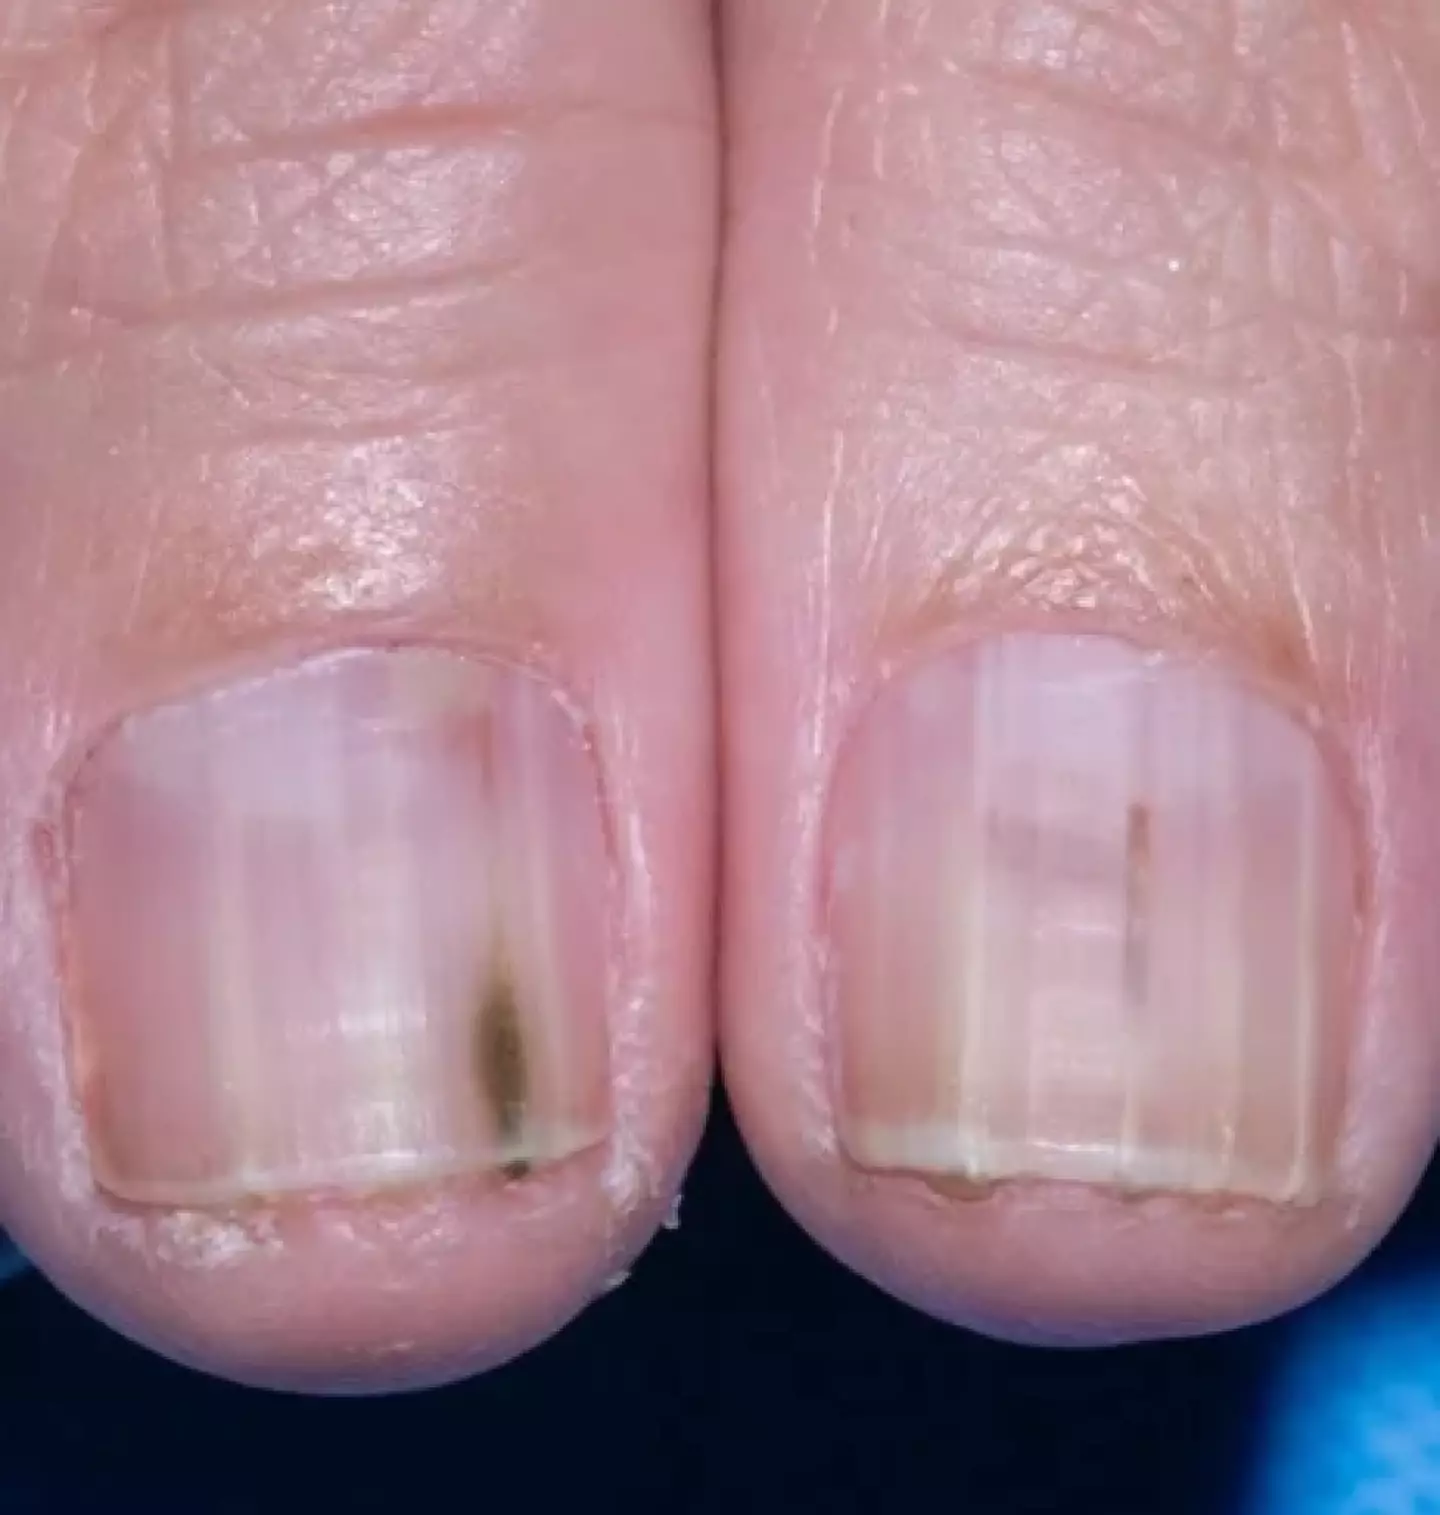 Stripes in the nails are something to look out for (JAMA Network)